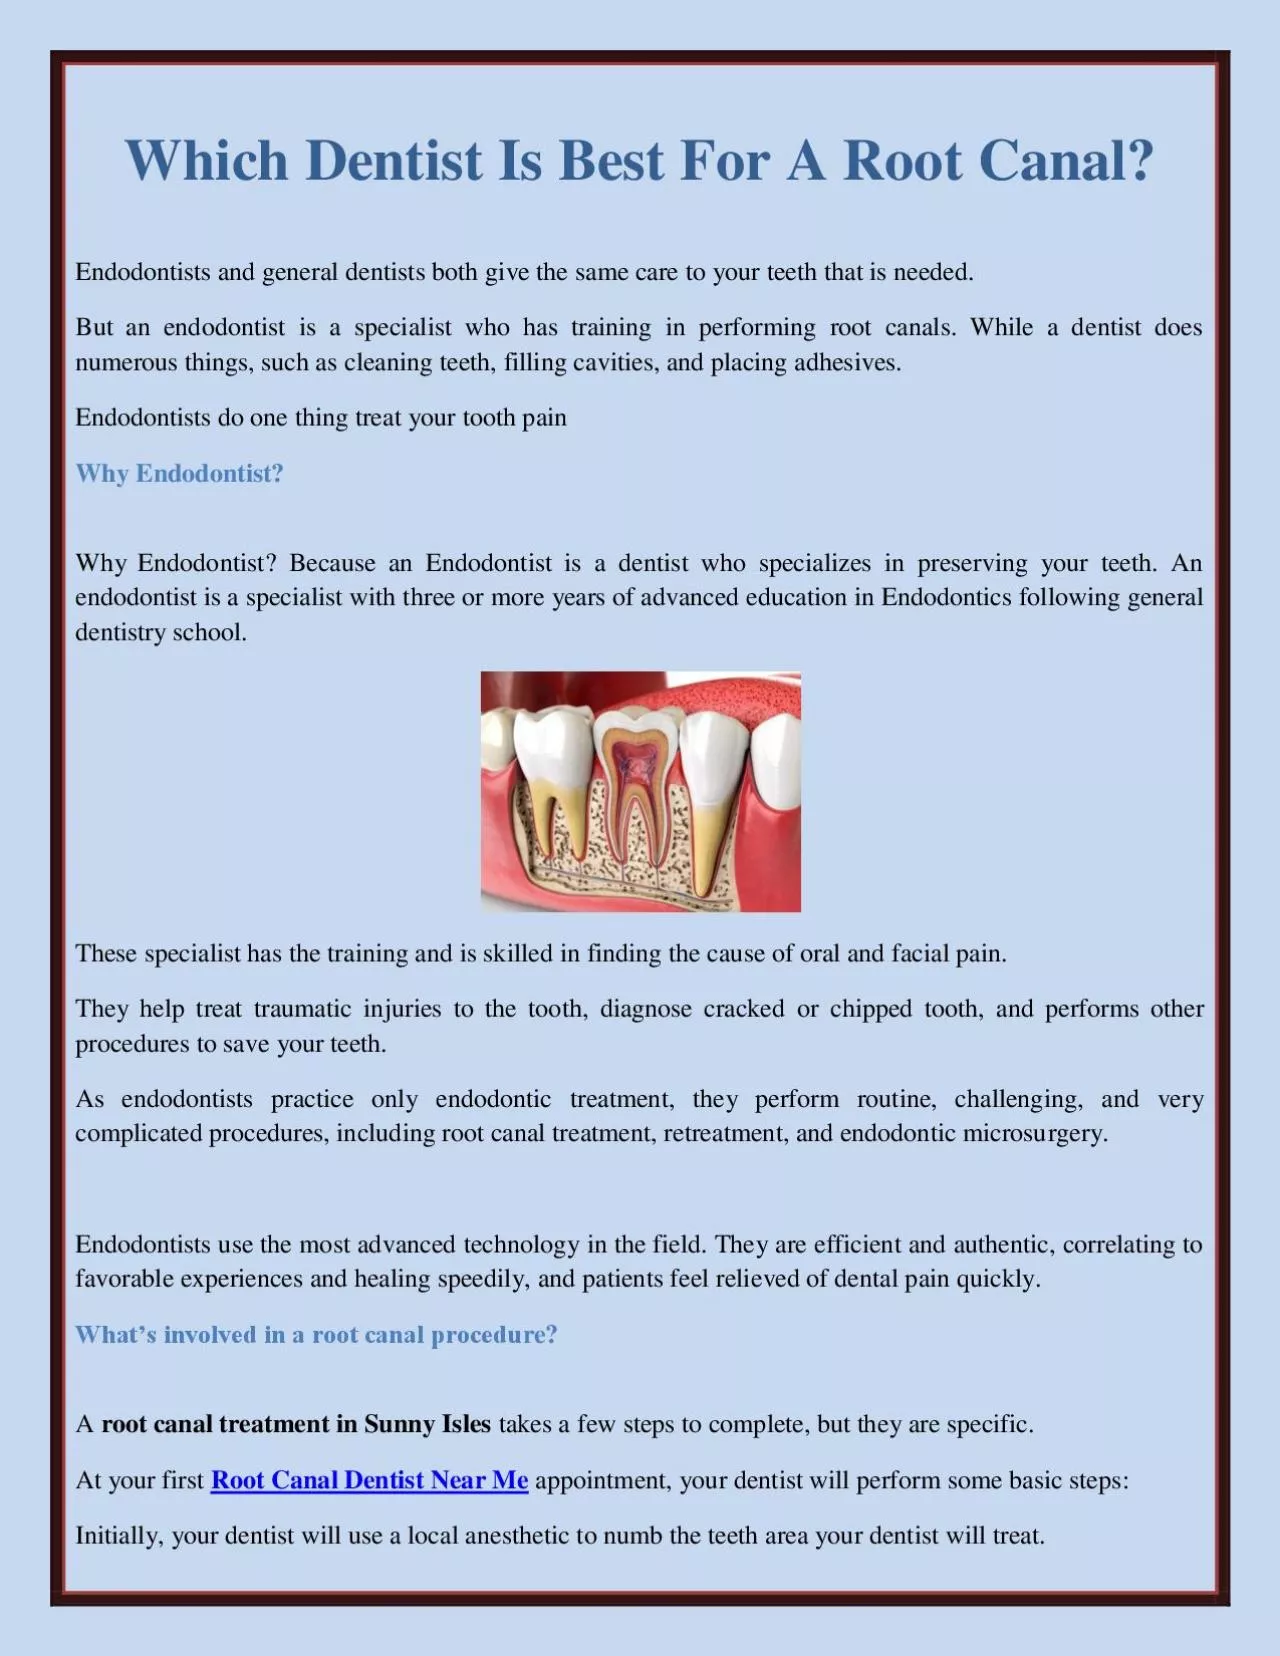 Which Dentist Is Best For A Root Canal?